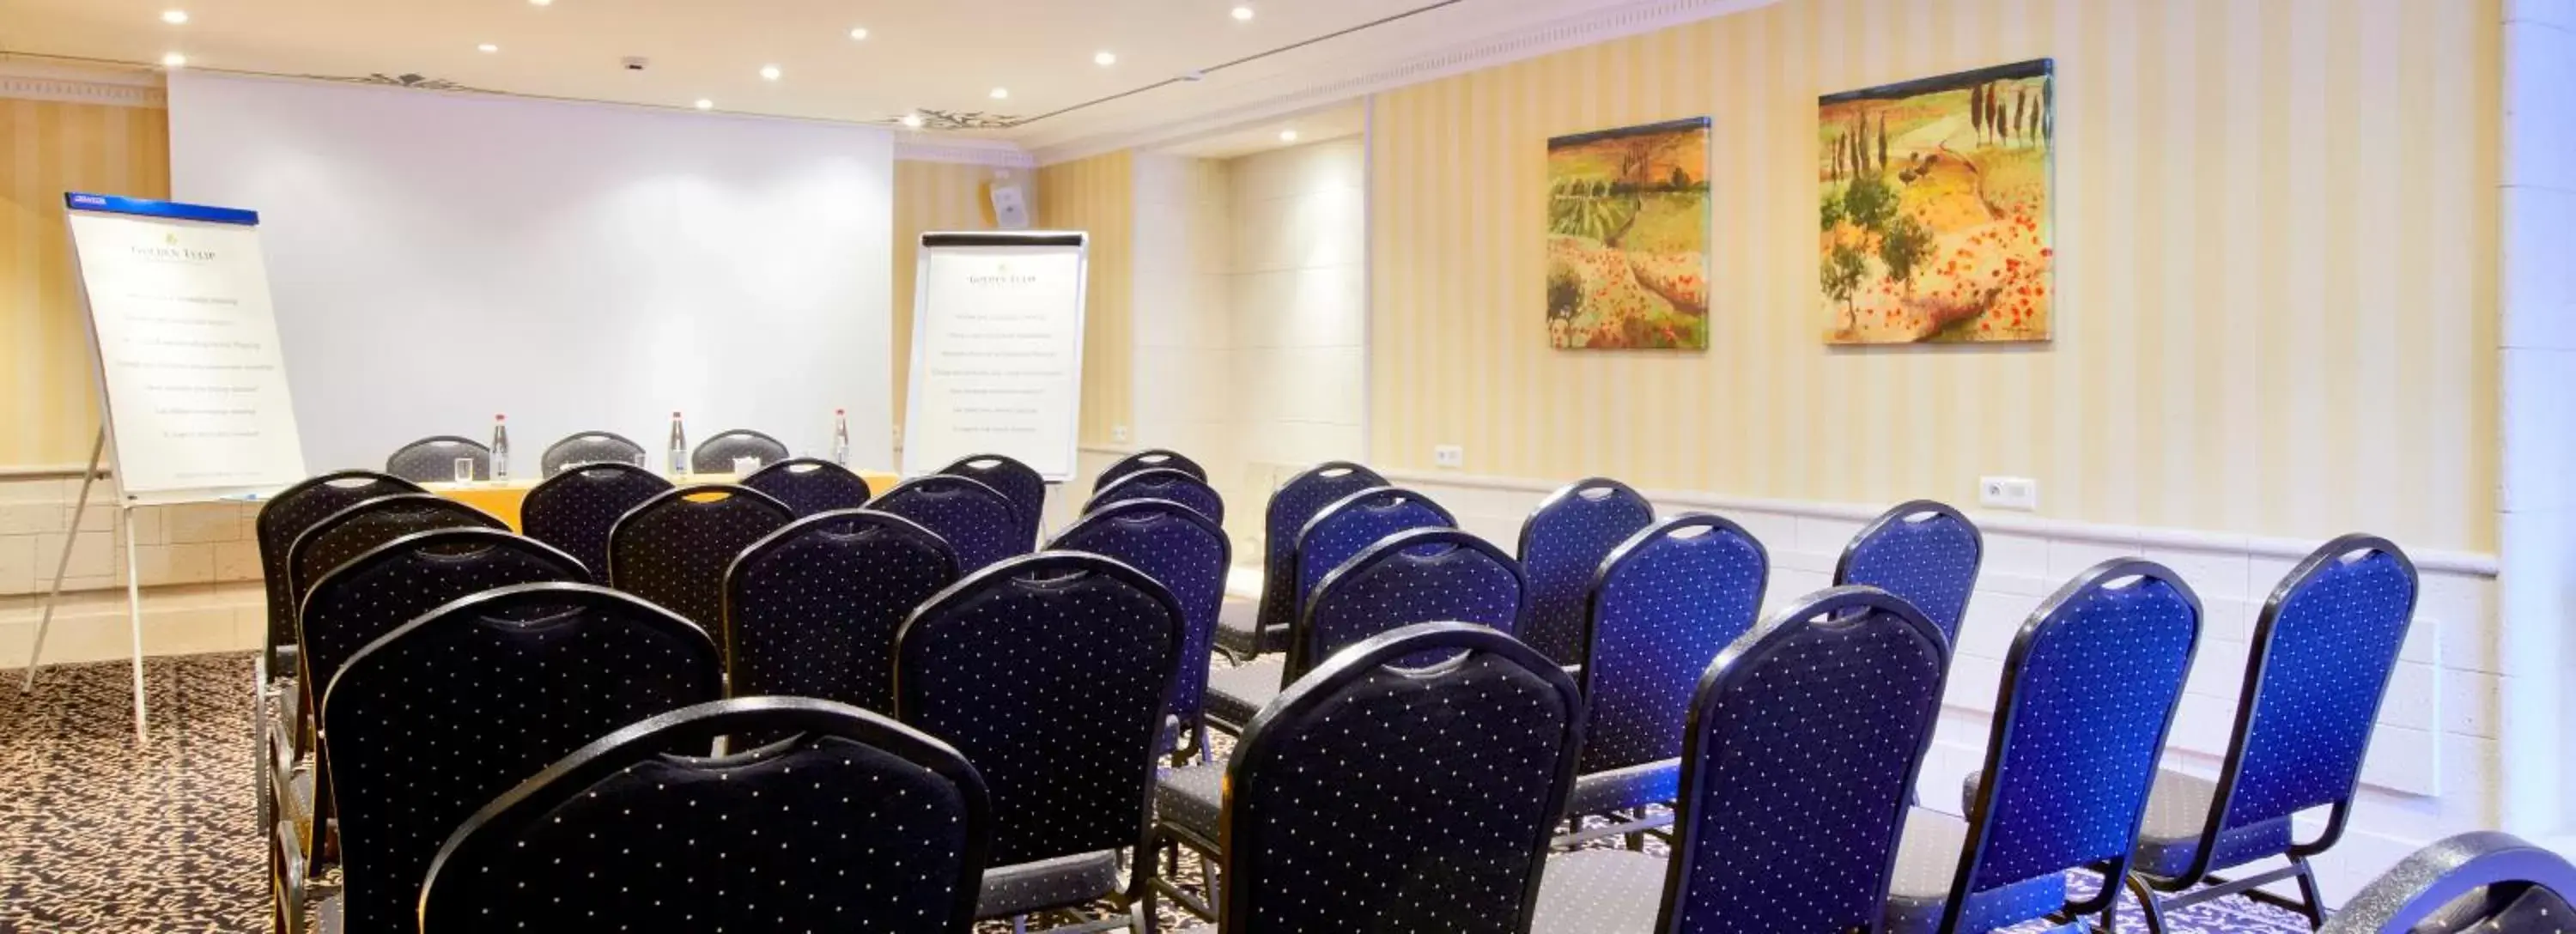 Meeting/conference room, Business Area/Conference Room in GOLDEN TULIP CANNES HOTEL de PARIS